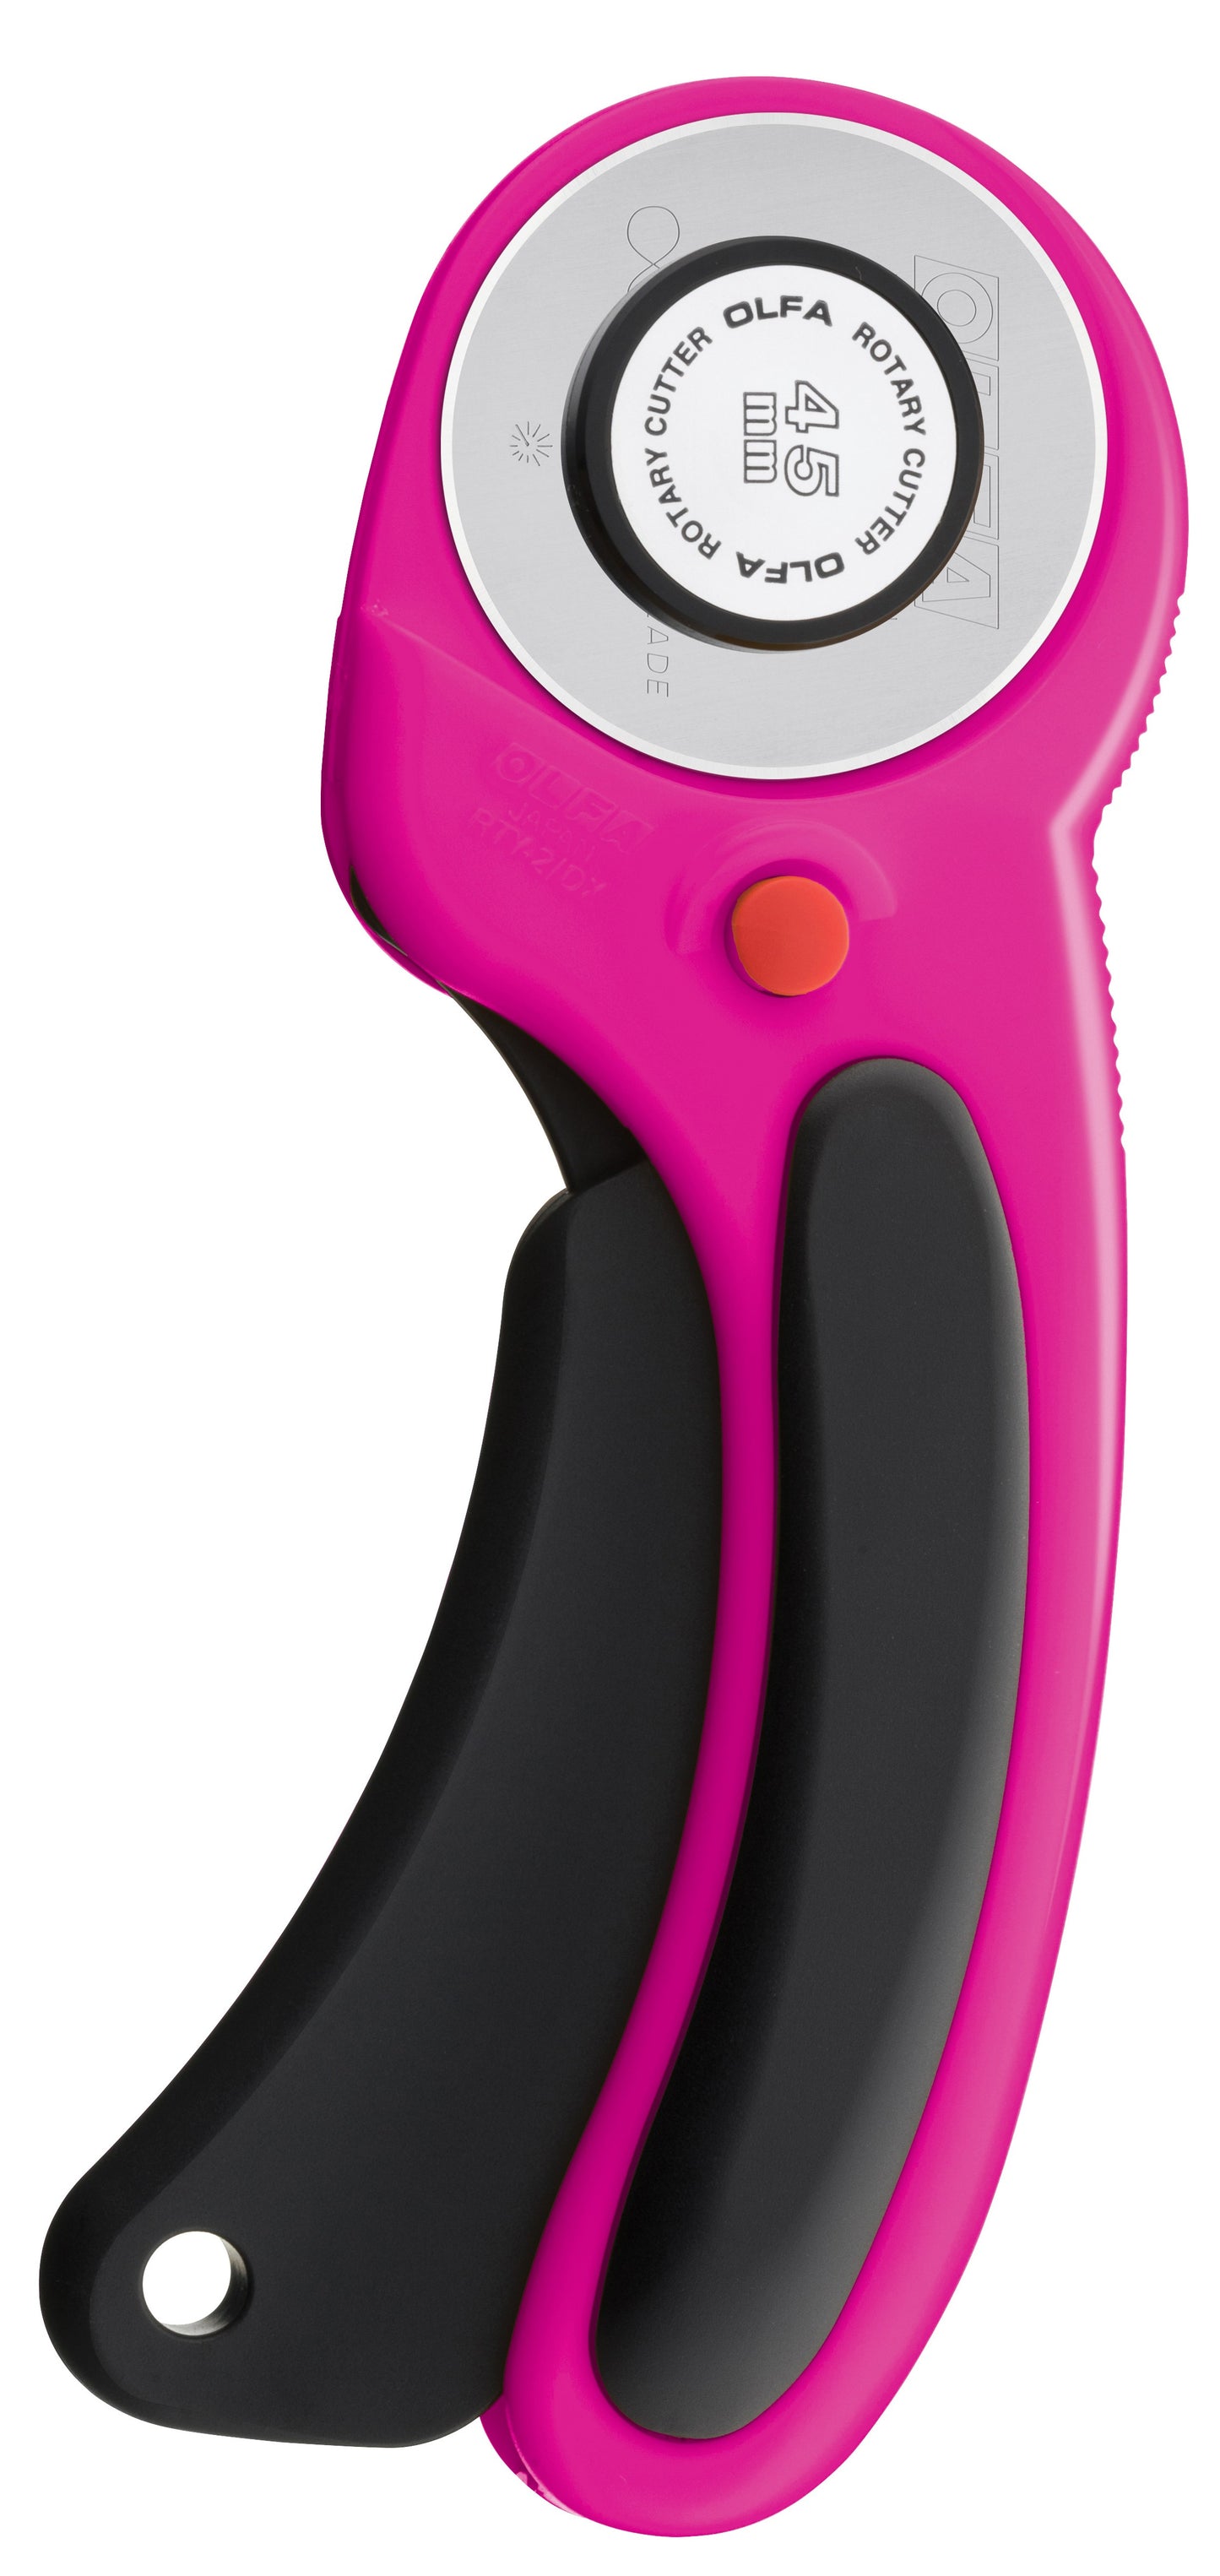 The most popular size and handle in Magenta. Features curved handle with squeeze trigger to lessen hand fatigue. Dual action safety lock Cuts multiple layers of fabric at once. Designed for both right and left handed use Lifetime Guarantee. Auto Retract Blade for safety. Olfa Magenta